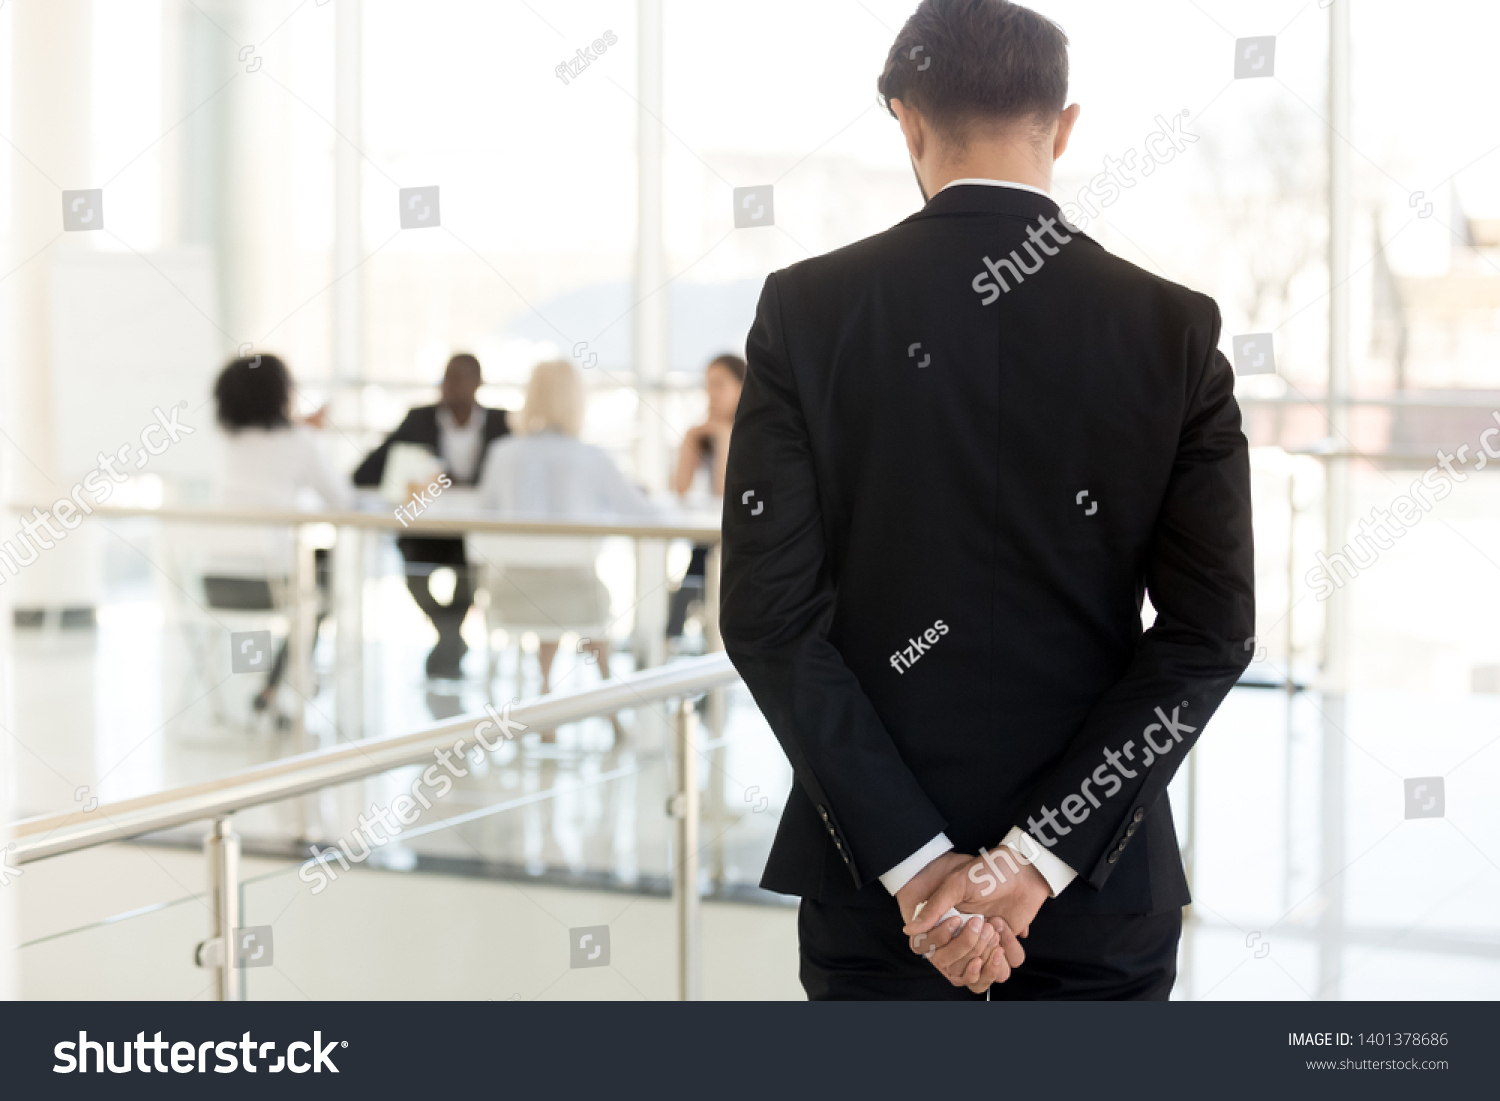 Nervous businessman waiting to enter at business meeting rear view, male employee, presenter, speaker worried about presentation for colleagues in boardroom, applicant waiting interview in hallway #1401378686